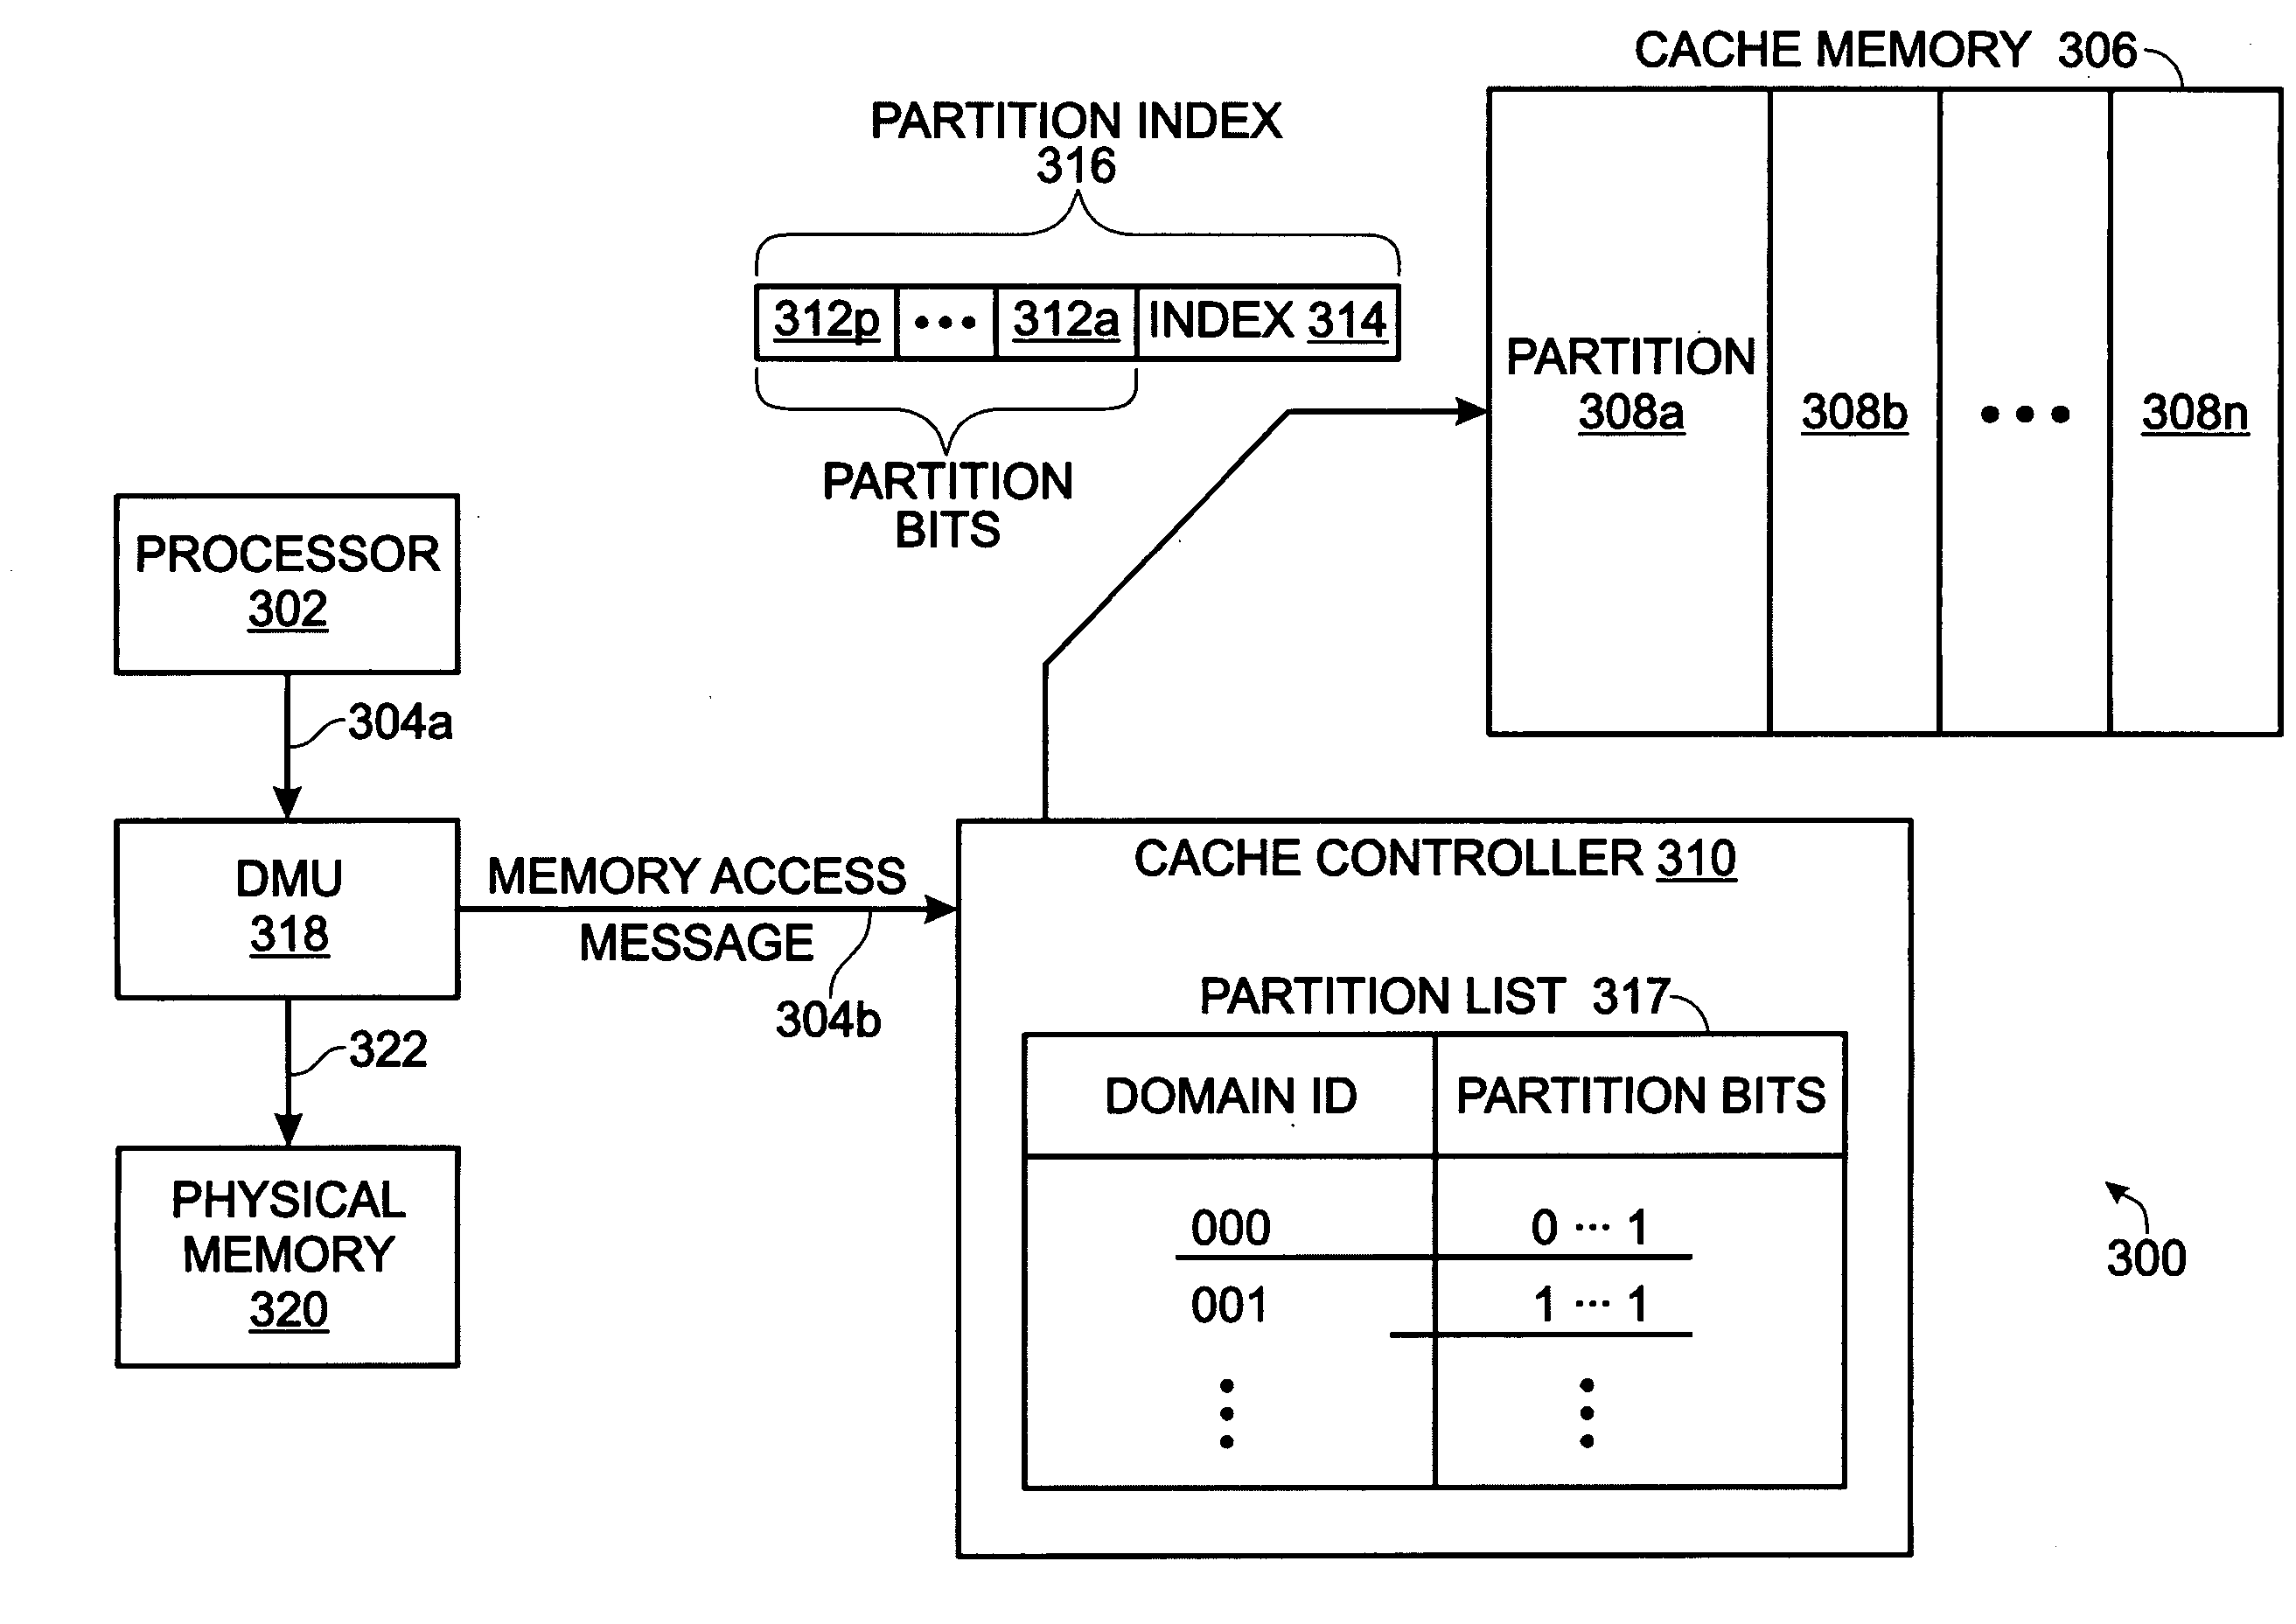 Multi-Domain Management of a Cache in a Processor System